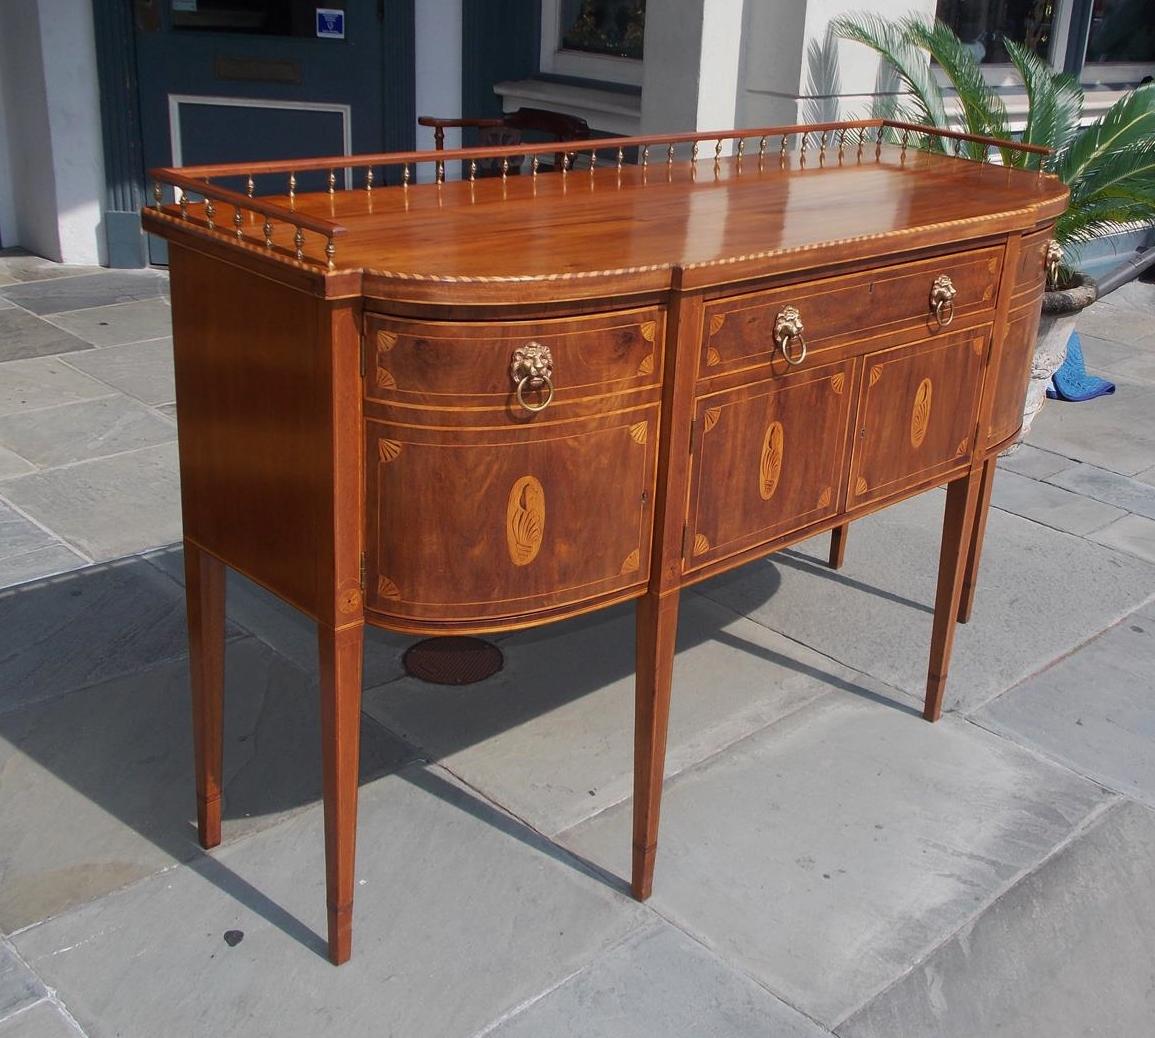 American Hepplewhite style mahogany sideboard with an acorn brass and mahogany rail gallery supported by a curvature and straight inlaid holly top, centered patera inlaid drawer over two lower conch shell inlaid cabinet drawers, original lions head